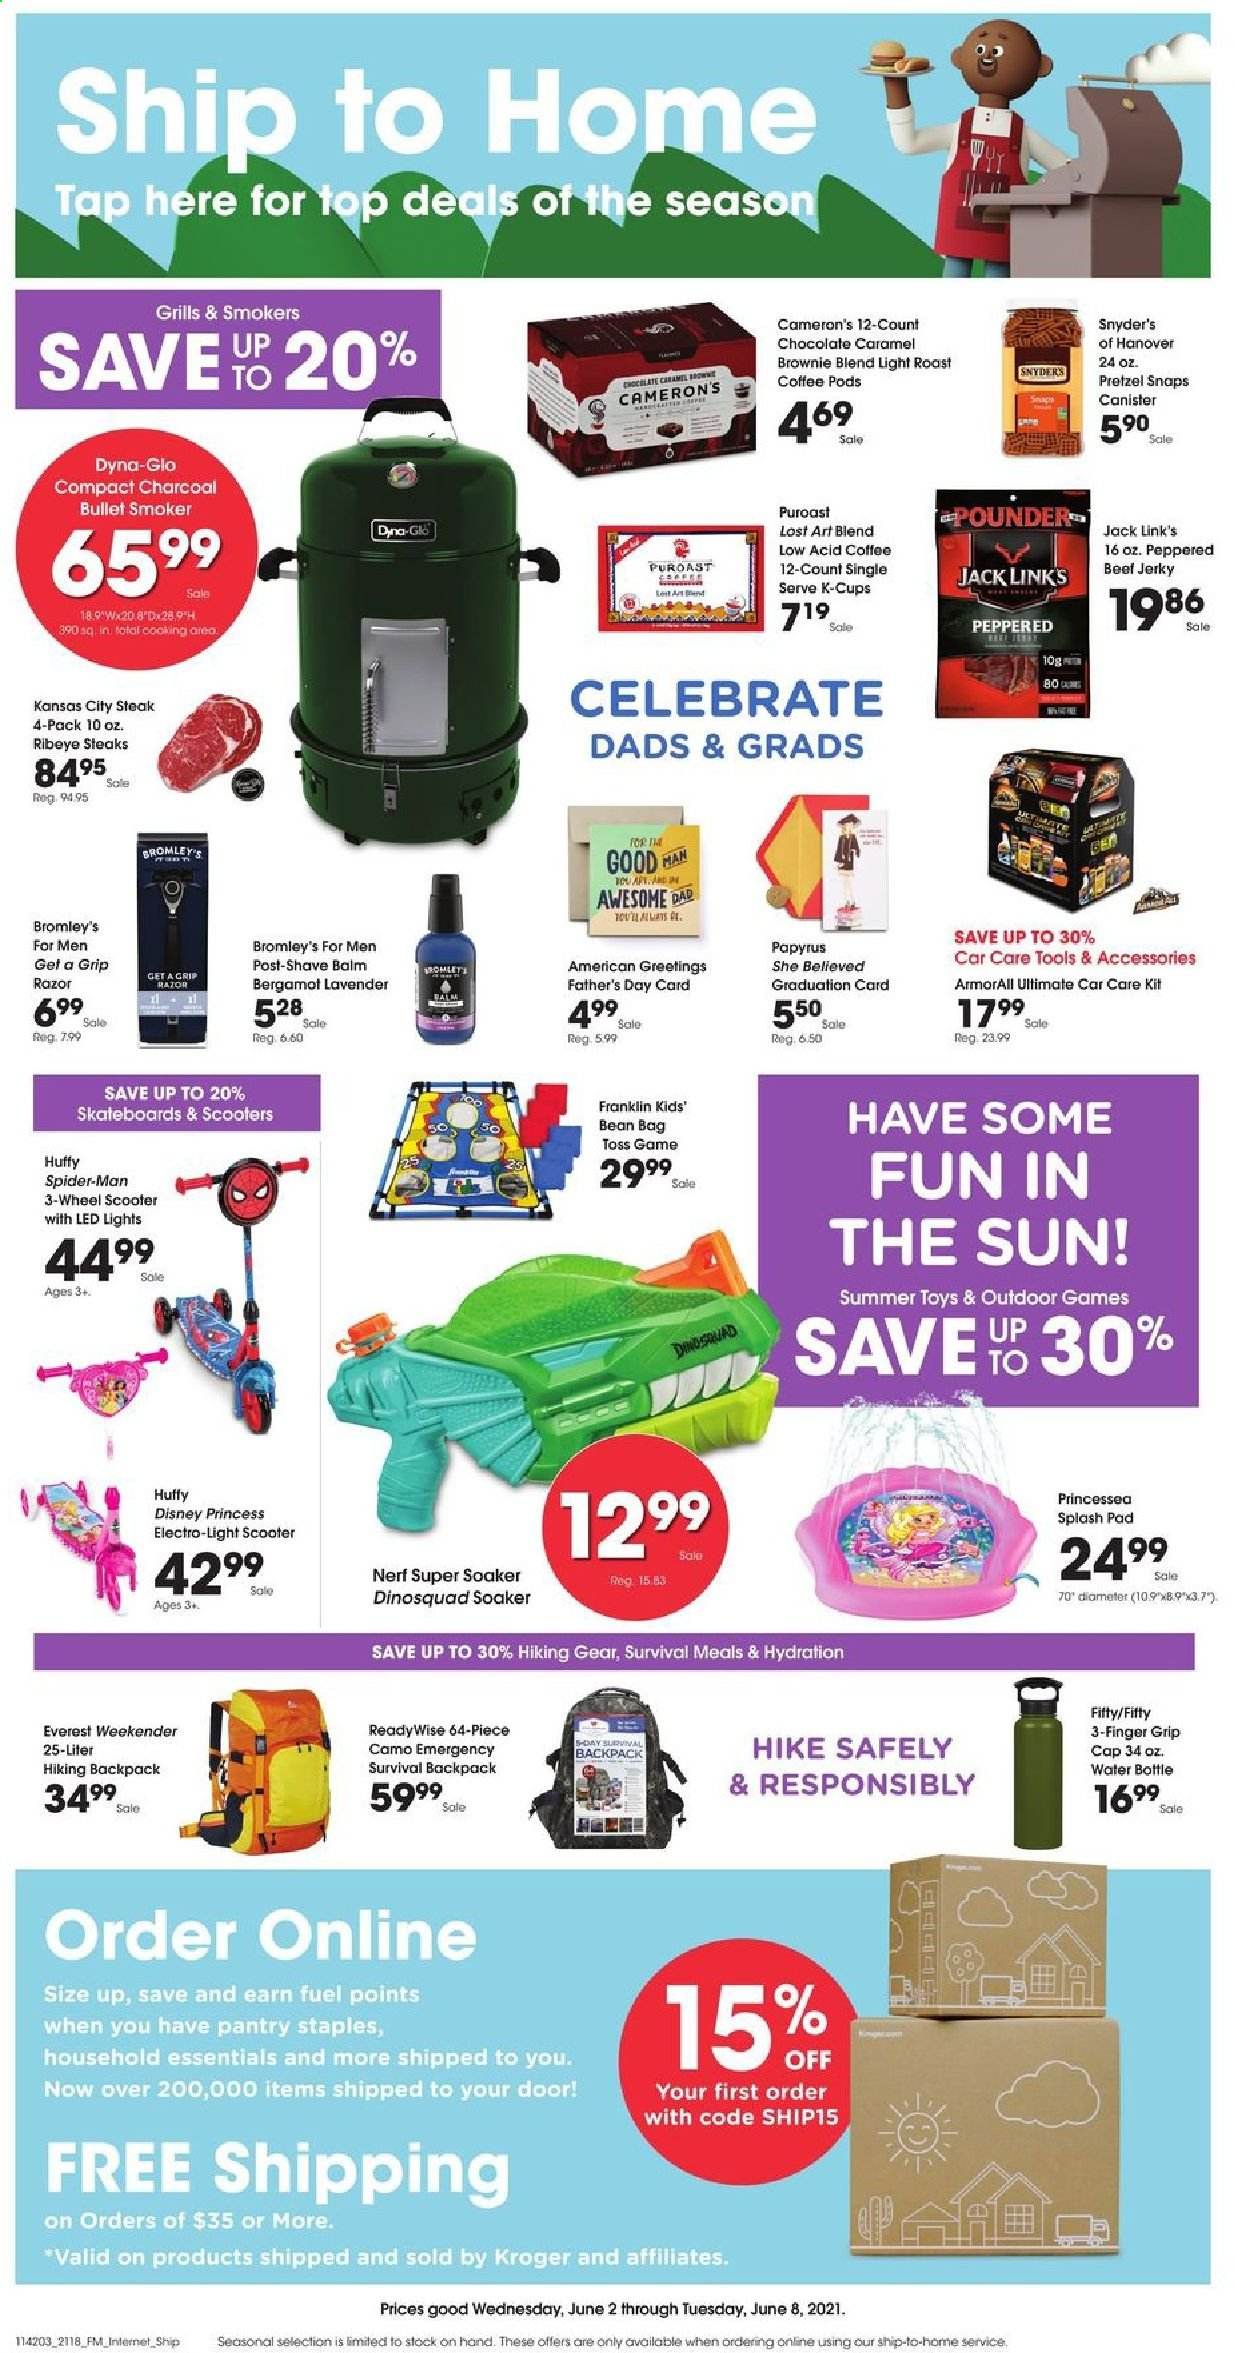 thumbnail - King Soopers Flyer - 06/02/2021 - 06/08/2021 - Sales products - bean bag, tools & accessories, pretzels, brownies, beef jerky, jerky, chocolate, Jack Link's, caramel, coffee pods, coffee capsules, K-Cups, beef meat, steak, ribeye steak, Disney, razor, canister, drink bottle, Nerf, cap, backpack, skateboard, Toss game, soaker, princess, LED light, charcoal, smoker. Page 1.